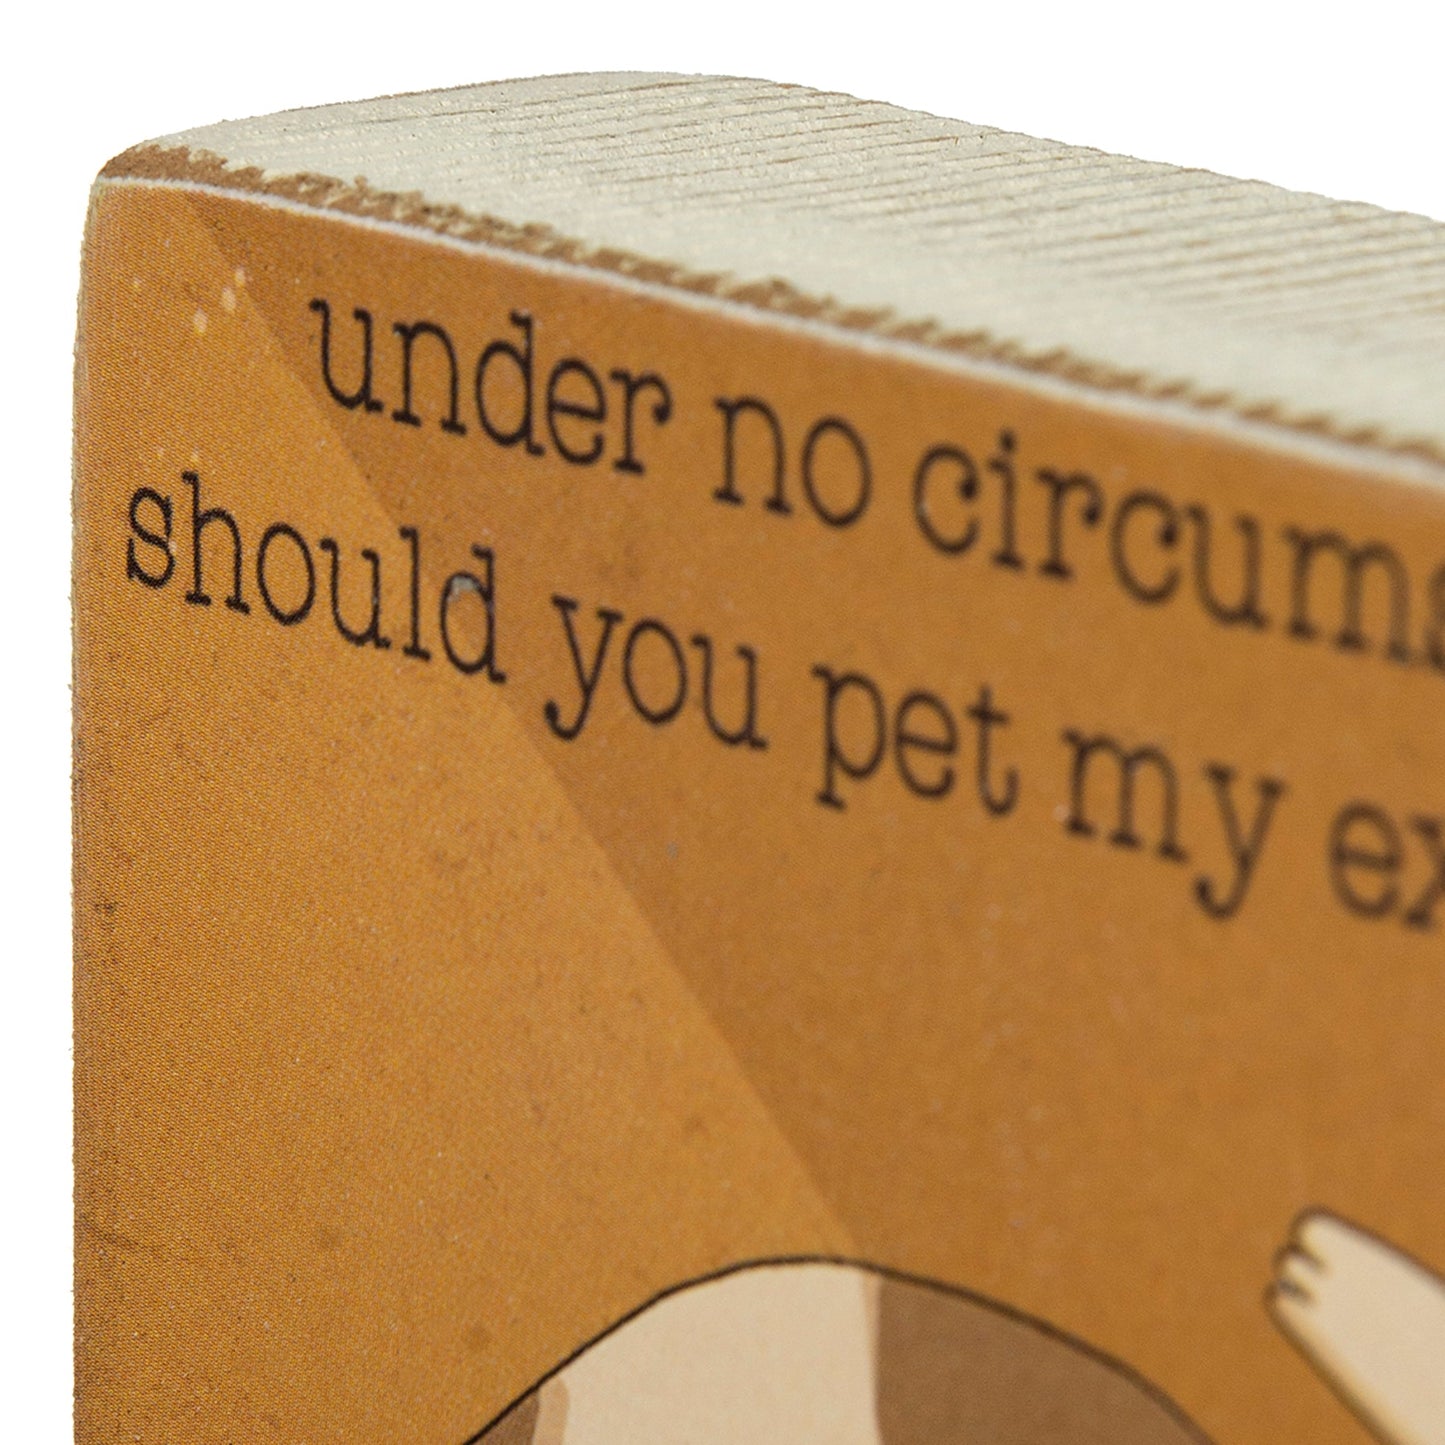 Under No Circumstances Should You Pet My Exposed Belly Wooden Block Sign | Pets, Cats | 4" x 3.25"